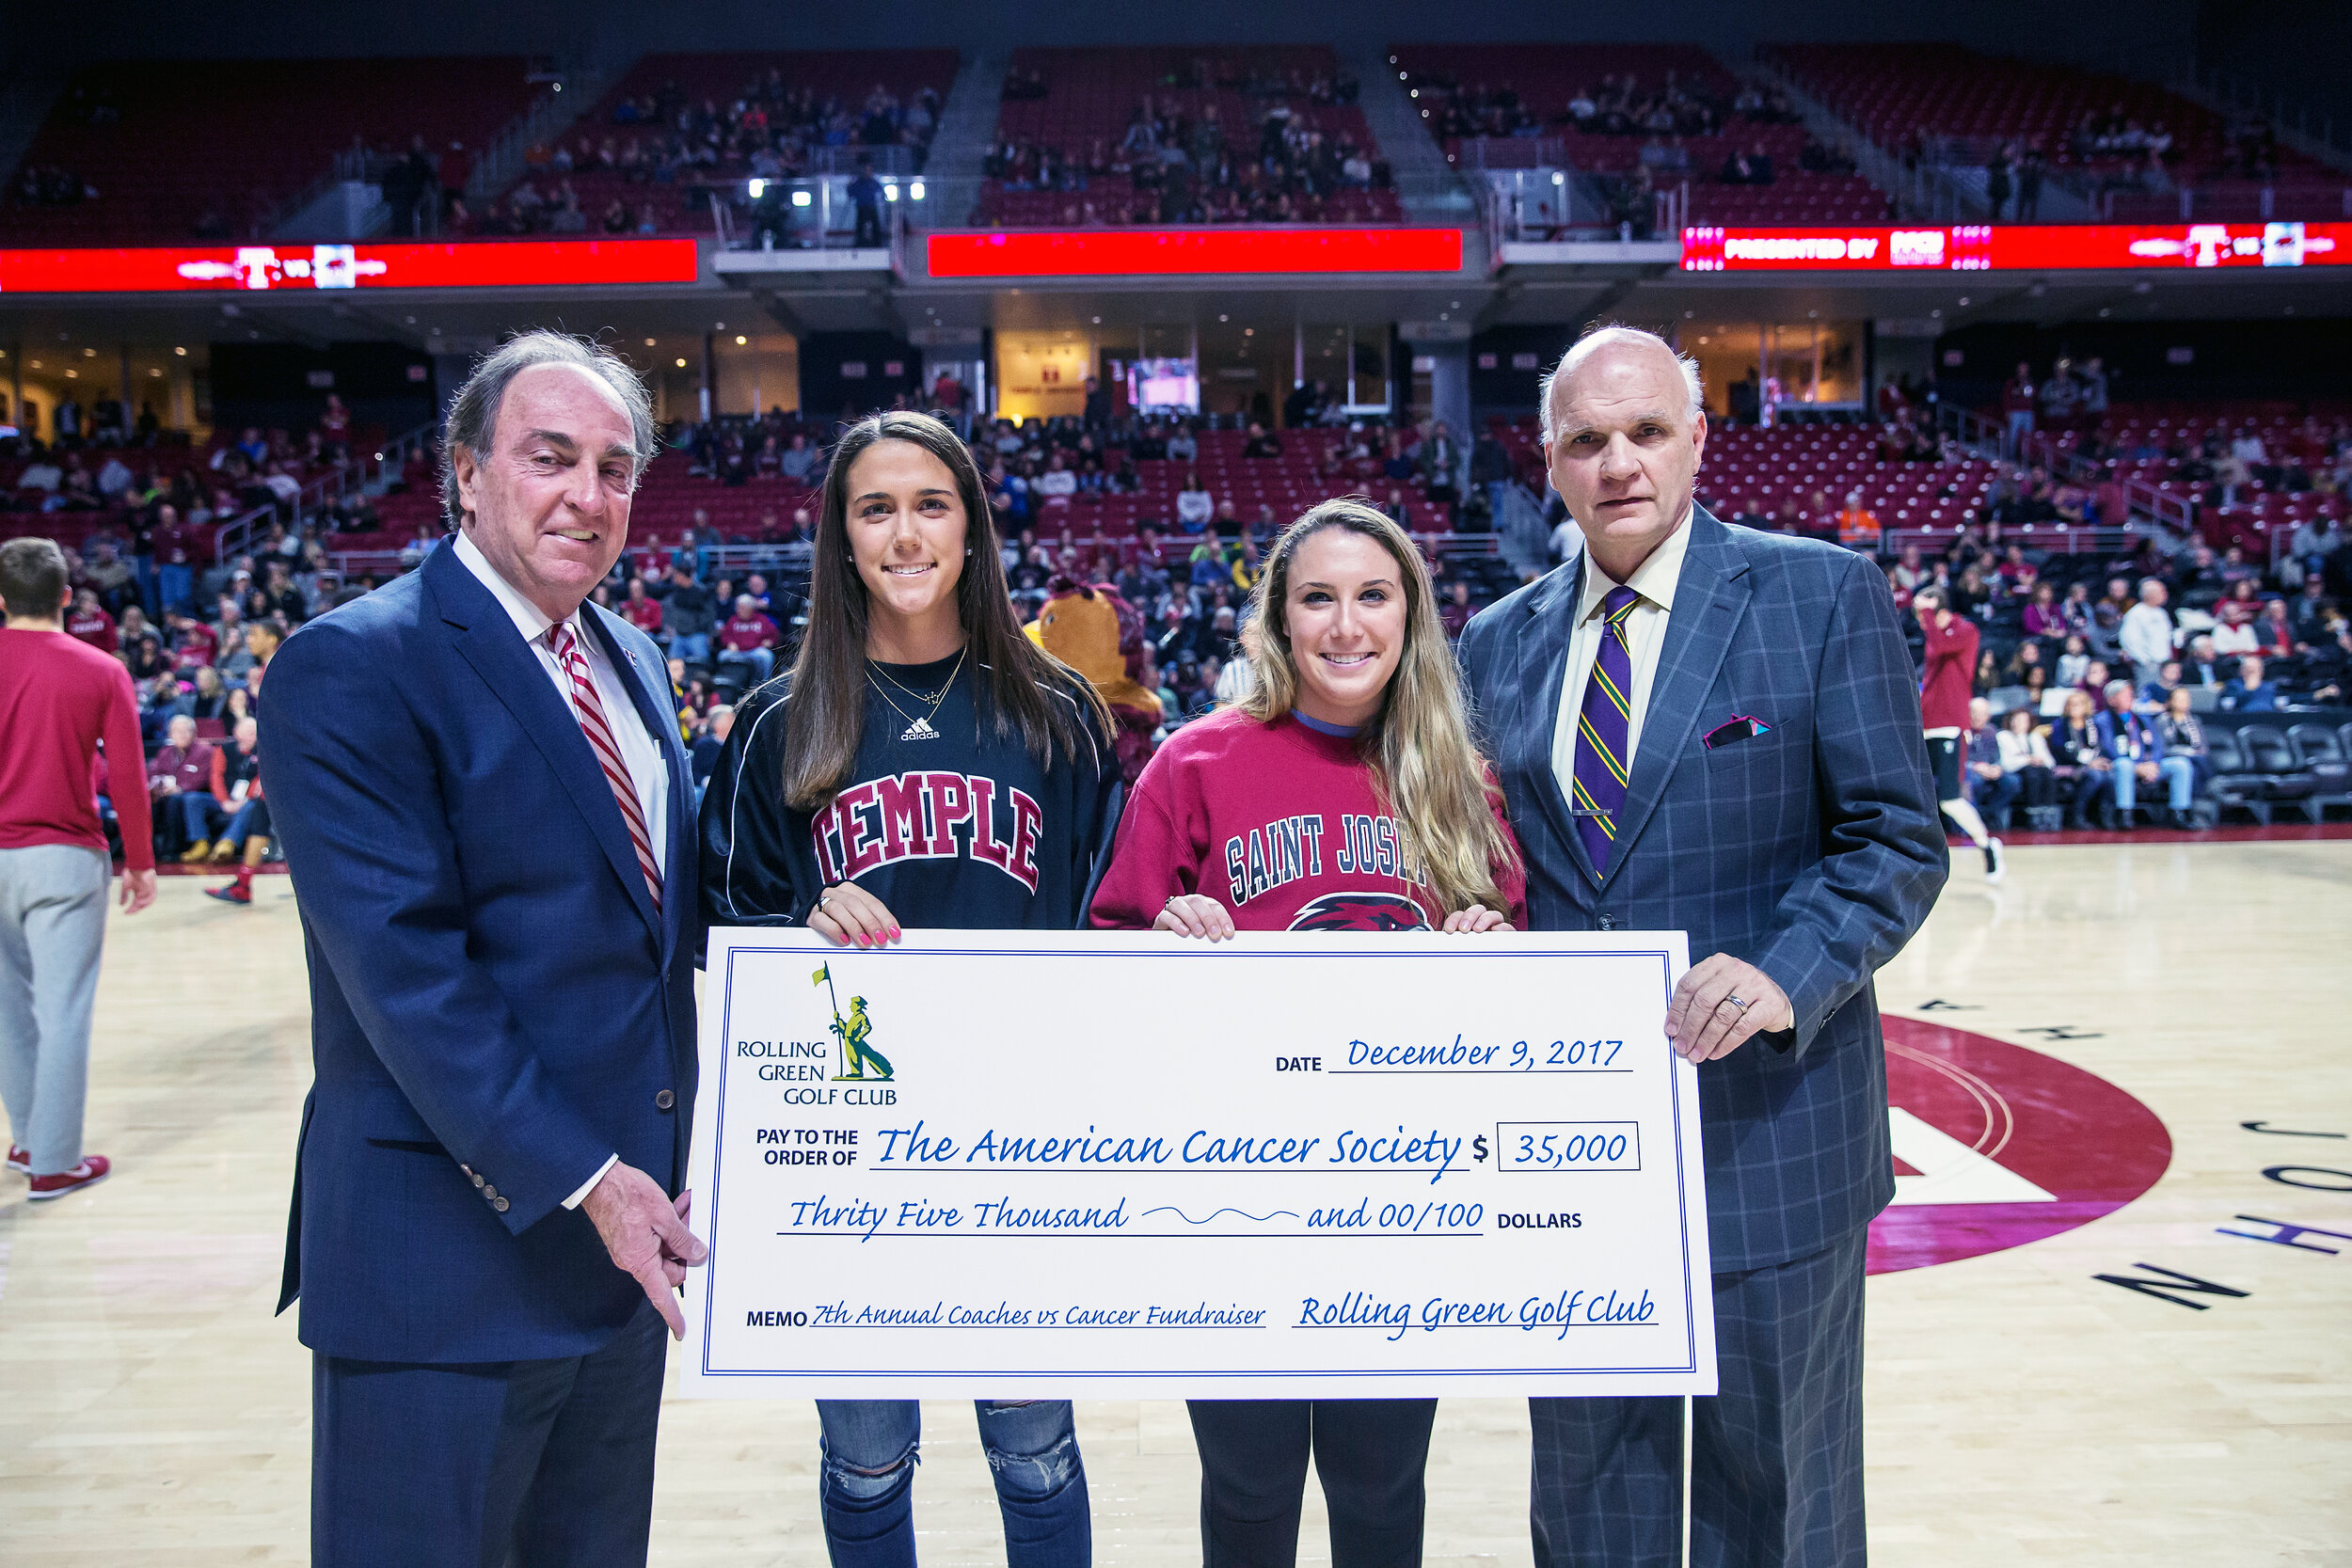 Fran Dunphy and Phil Martelli present a check to the American Cancer Society